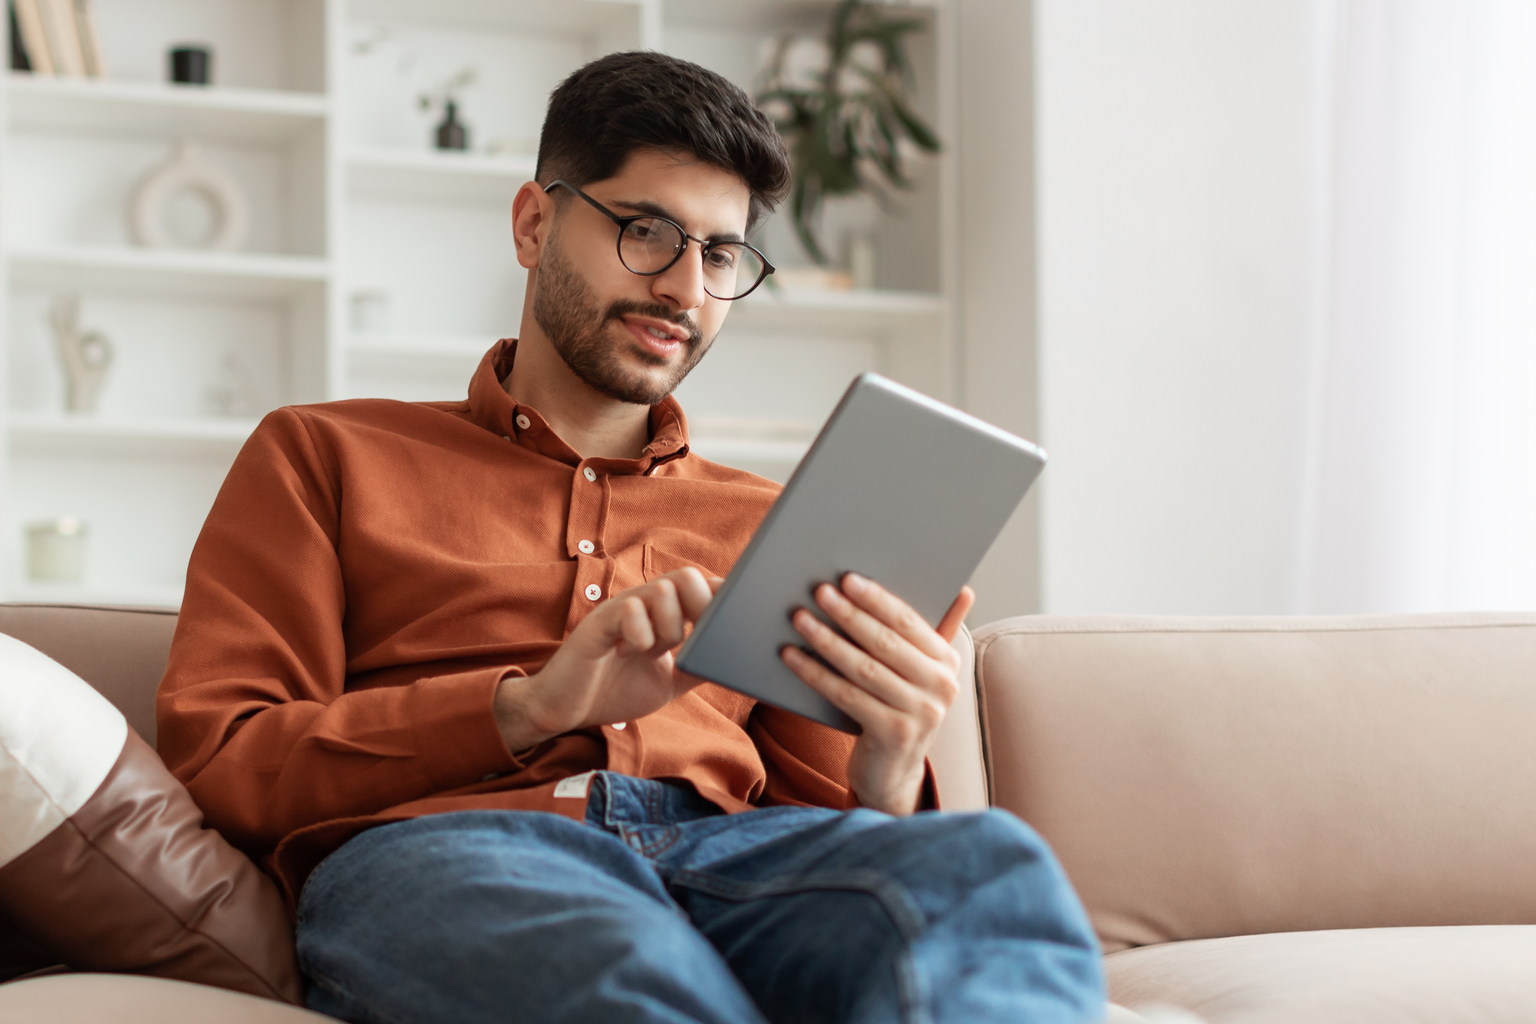 Man sitting on the couch using a tablet at home